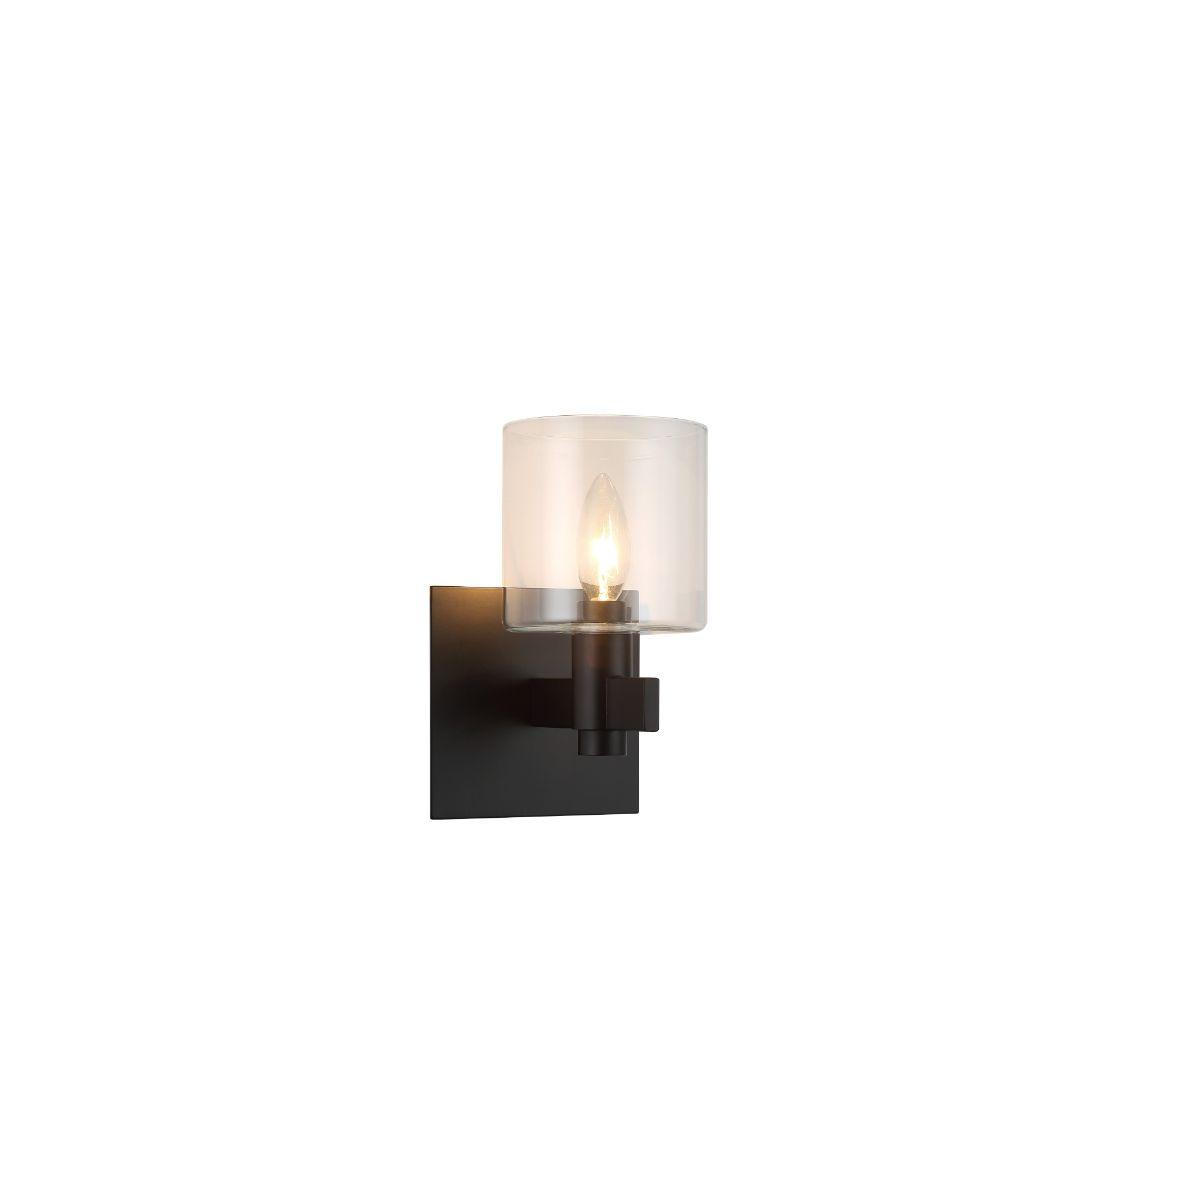 Decato 9 in. Wall Sconce